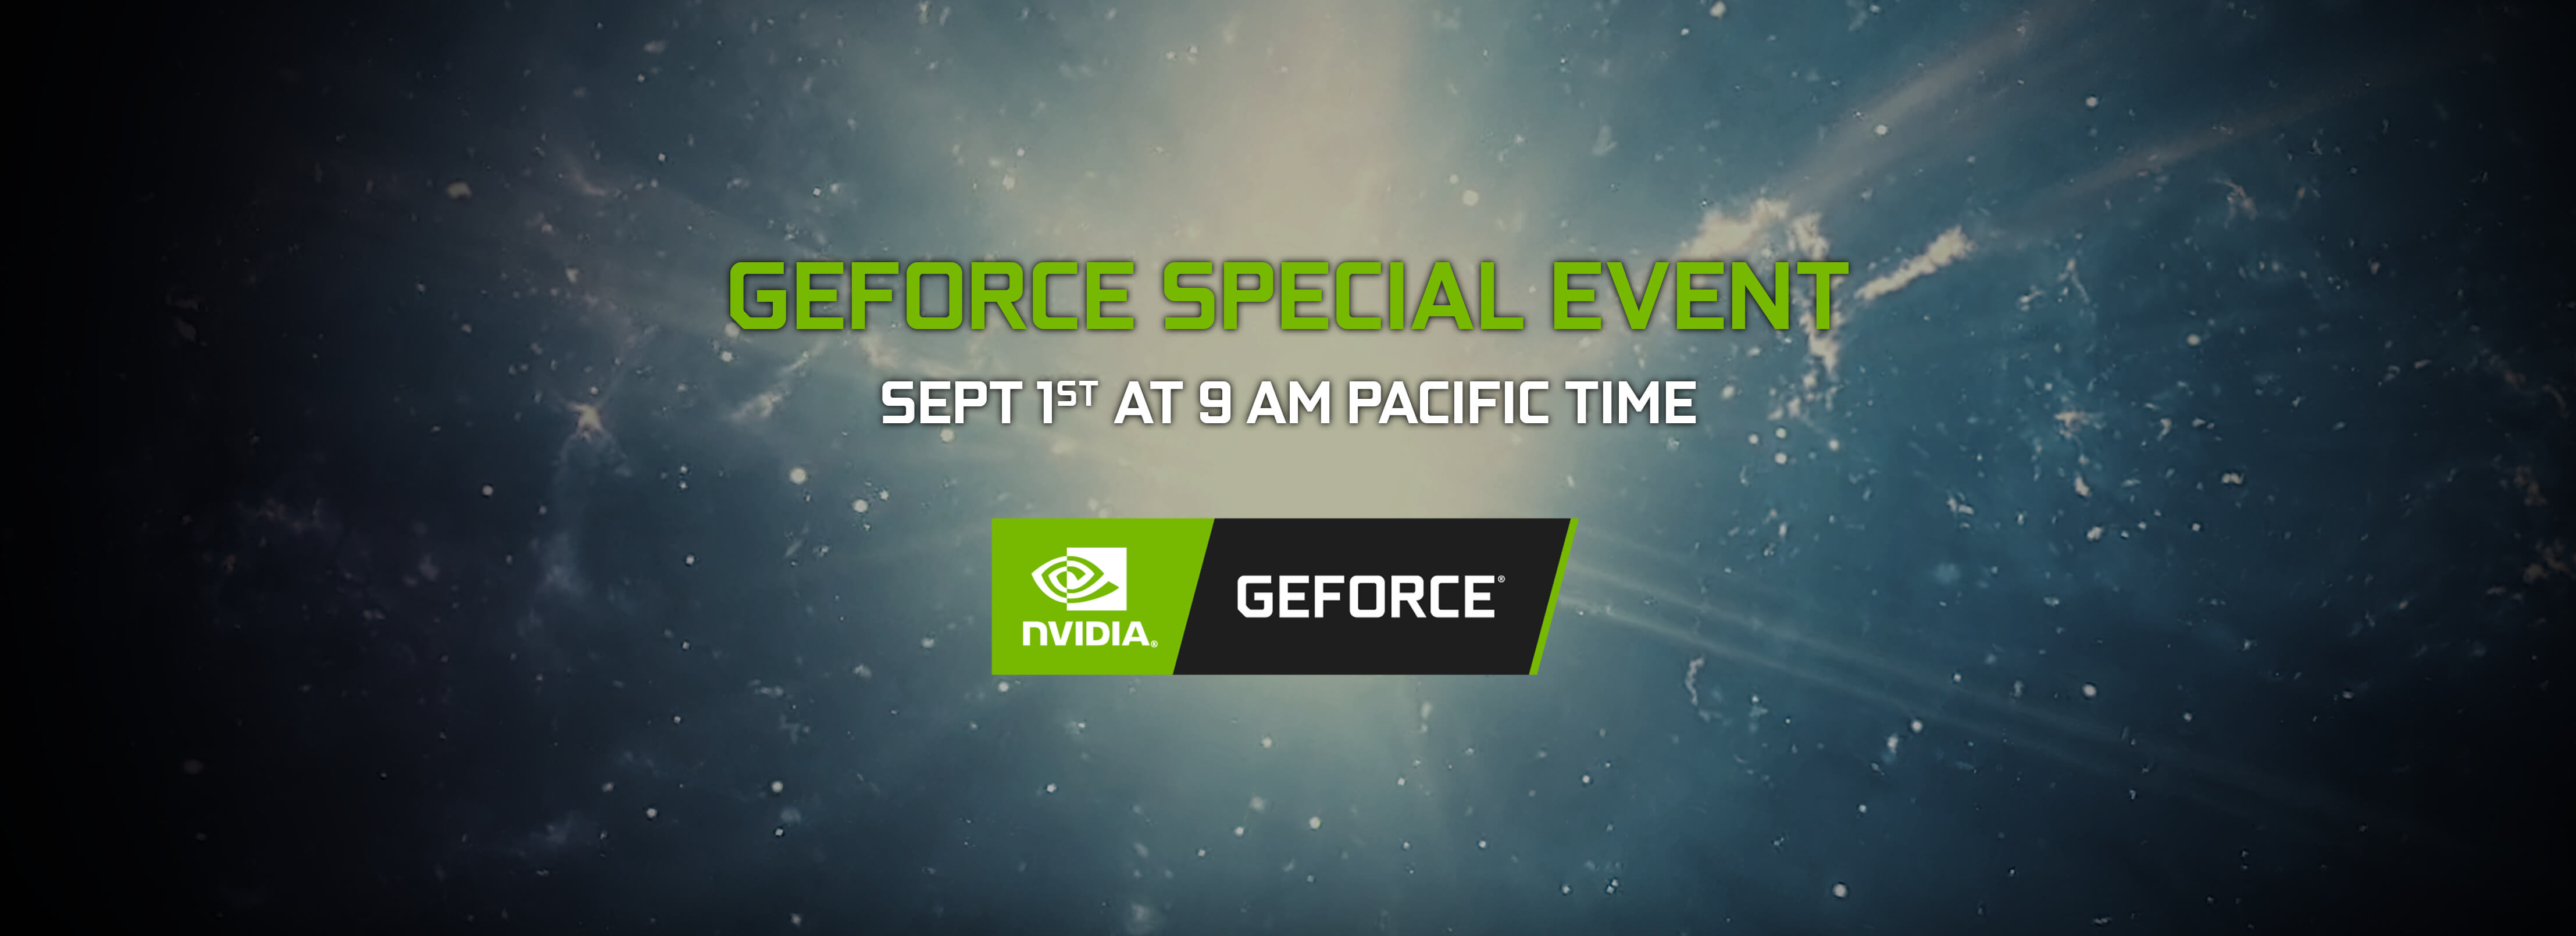 NVIDIA GeForce Special Event!